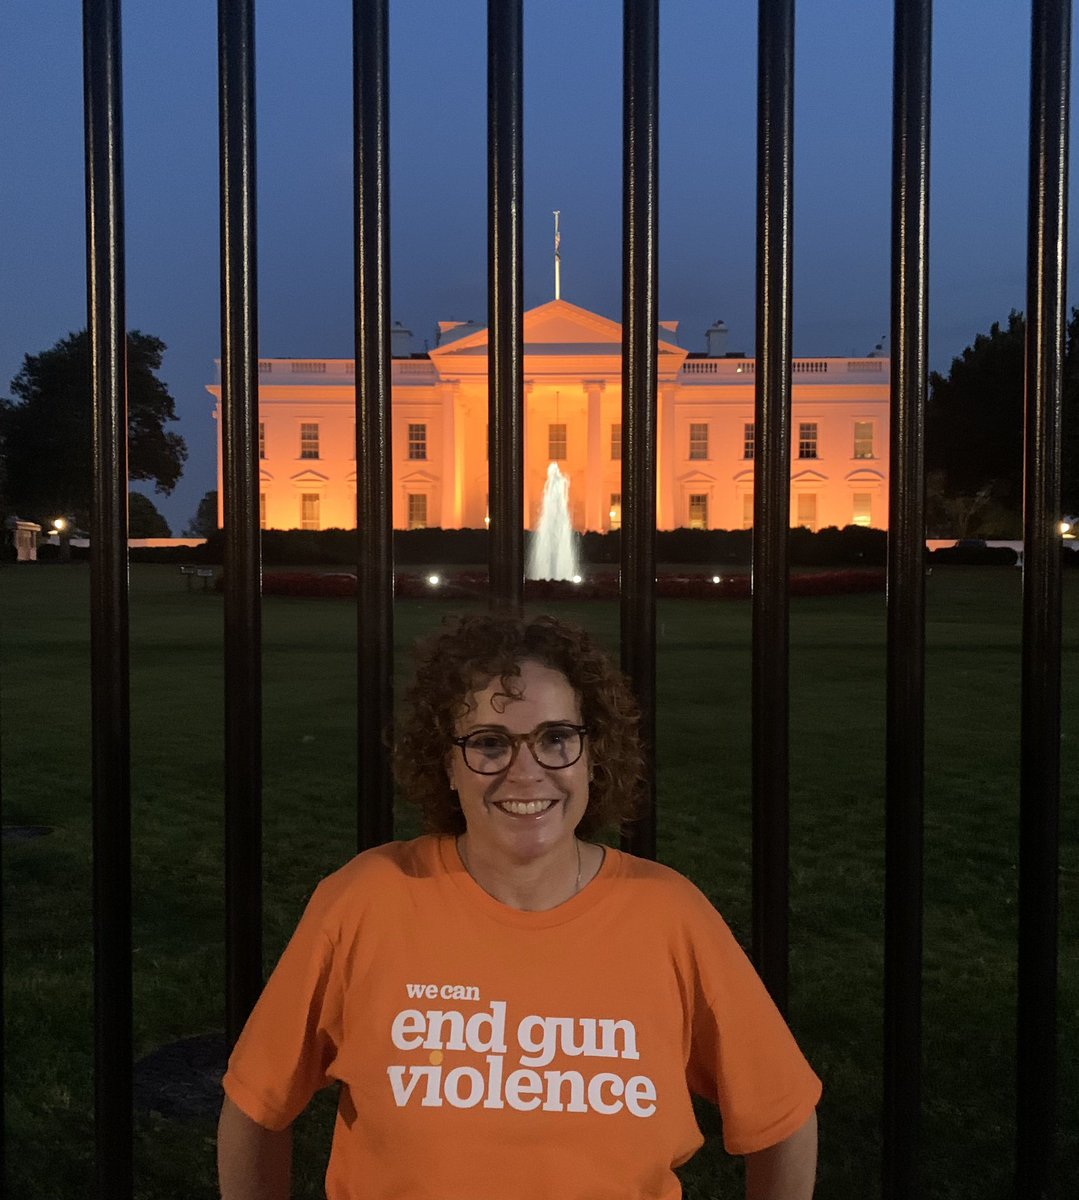 On this National Gun Violence Awareness Day I #WearOrange for the hundreds of people killed, injured and traumatized by gun violence every single day in America. @MomsDemand